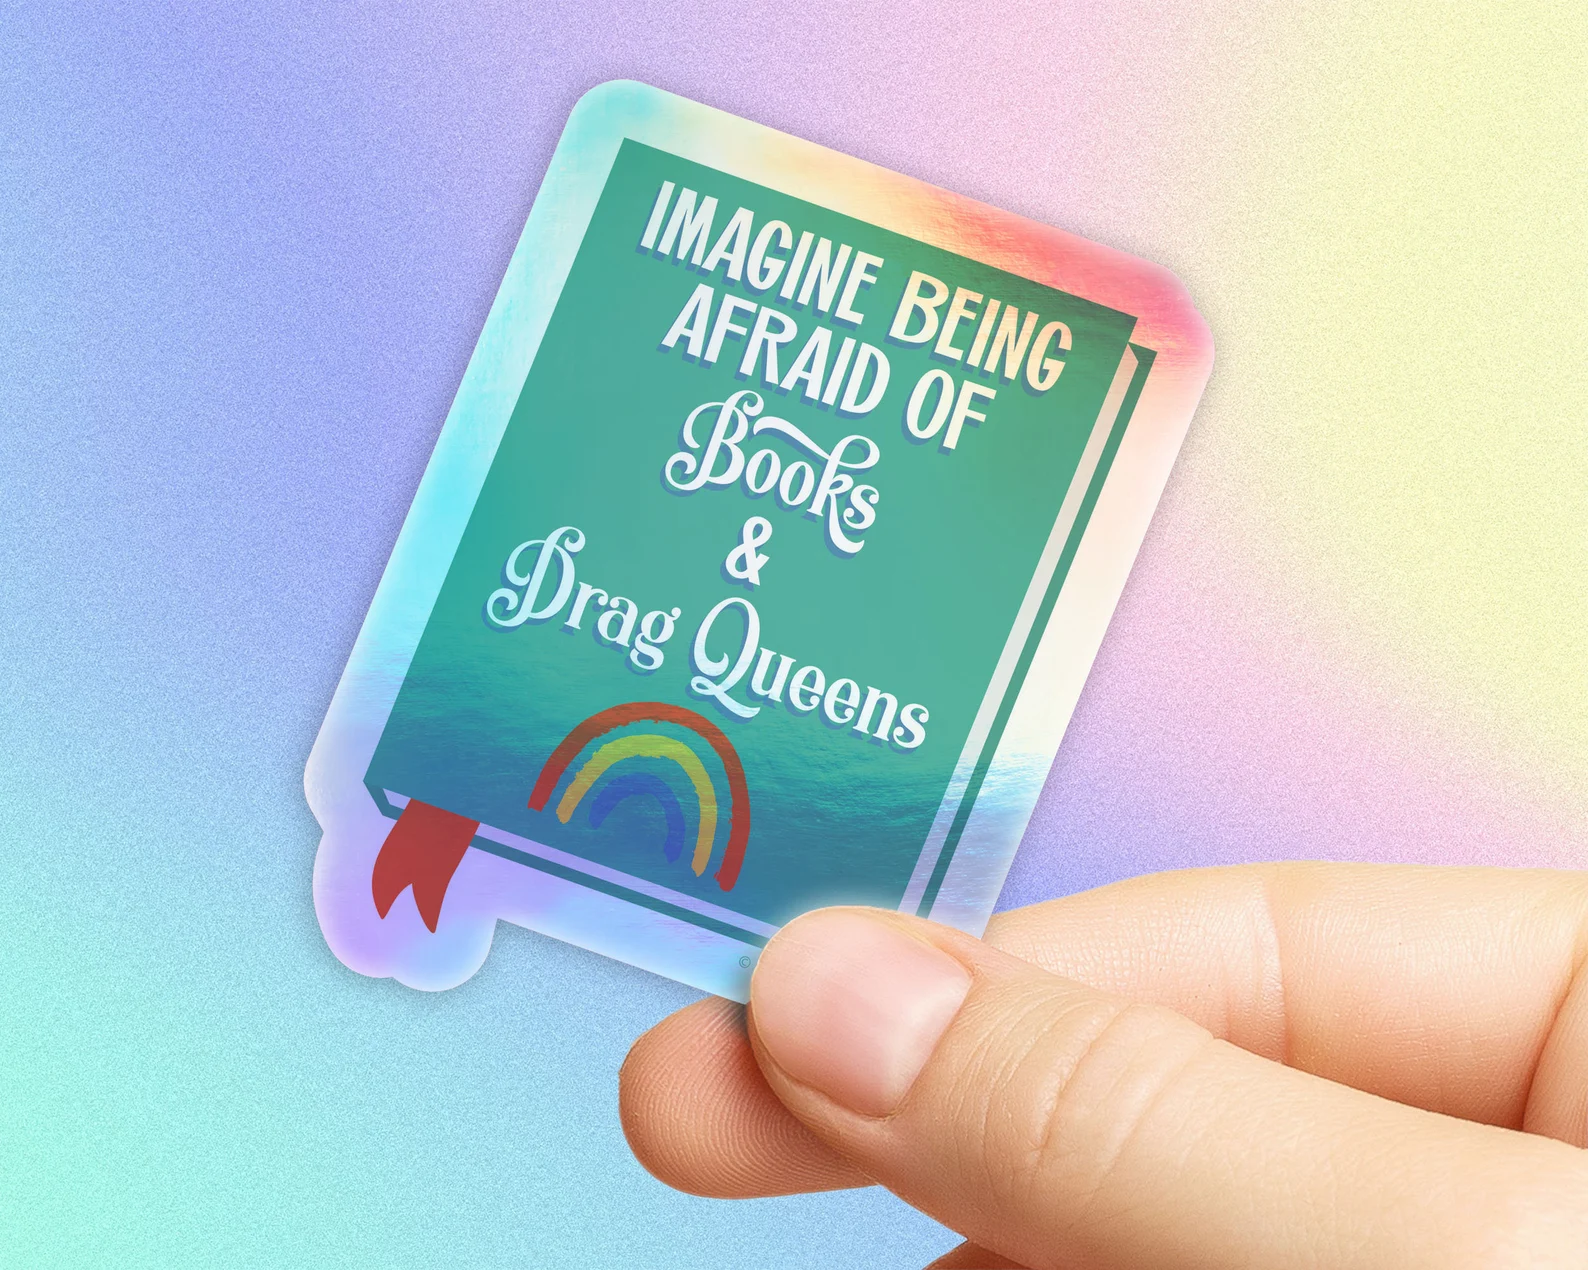 A holographic sticker that is in the shape of a book. On the cover it says "imagine being afraid of books and drag queens."